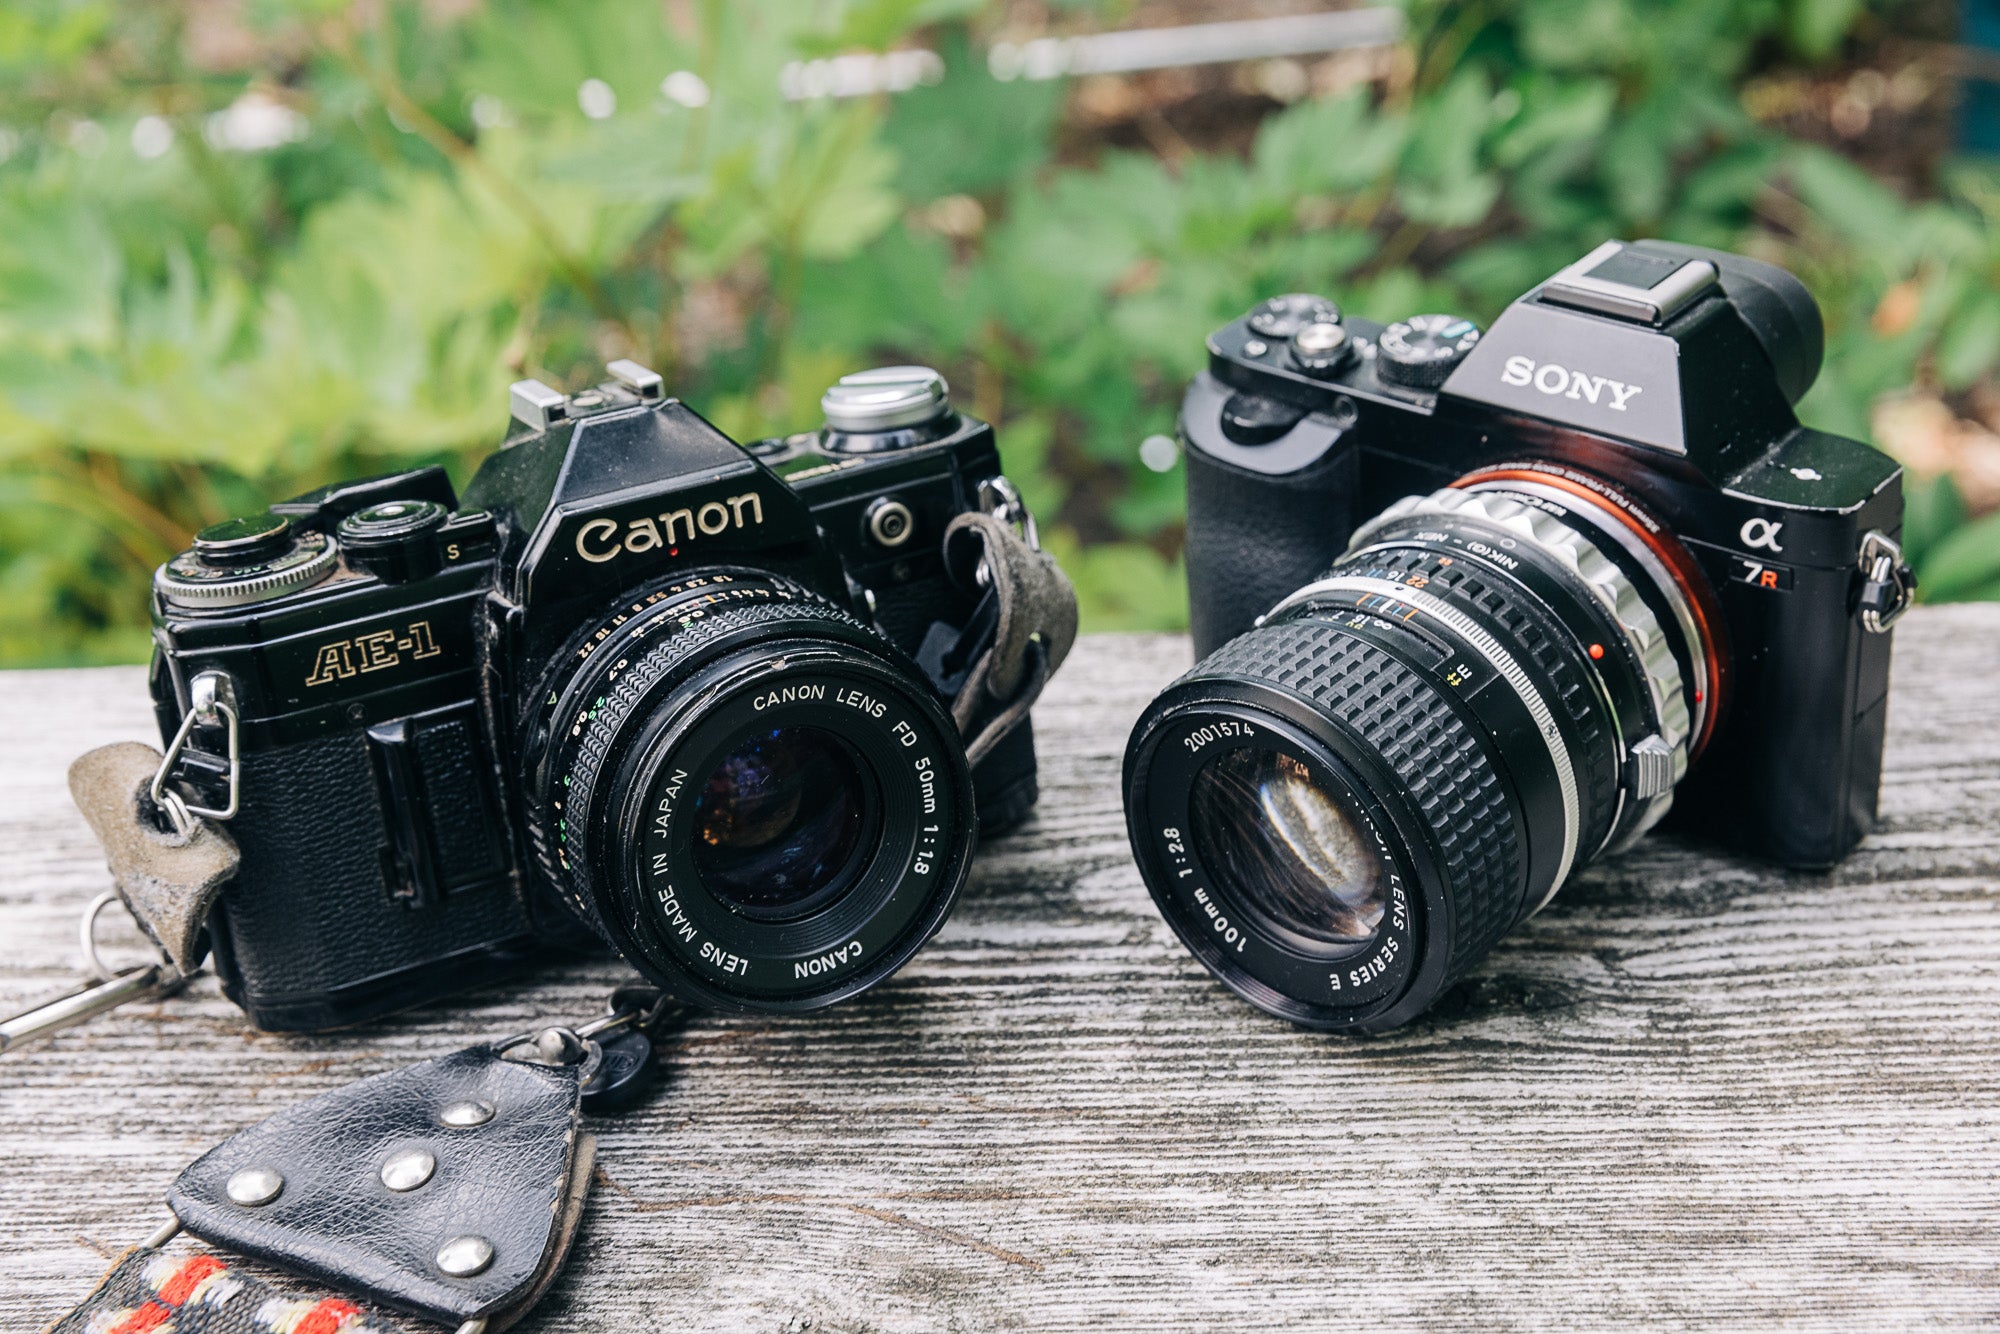 A sony a7r with an vintage lenses and canon AE-1 cameras